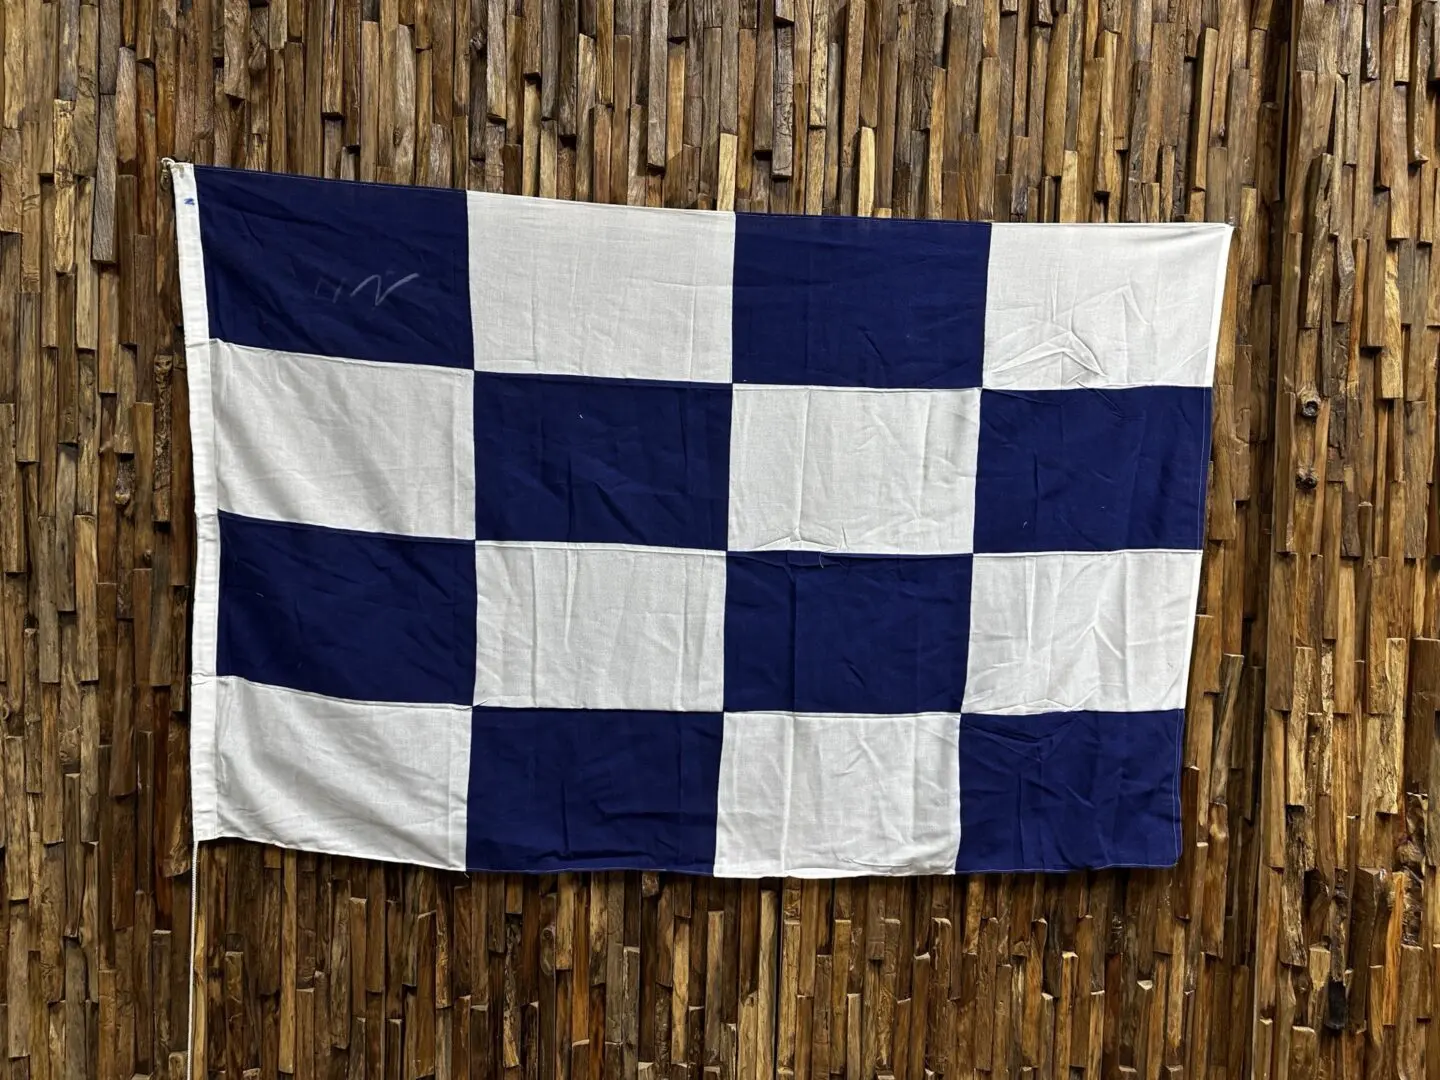 A blue and white checkered flag hanging on the wall.